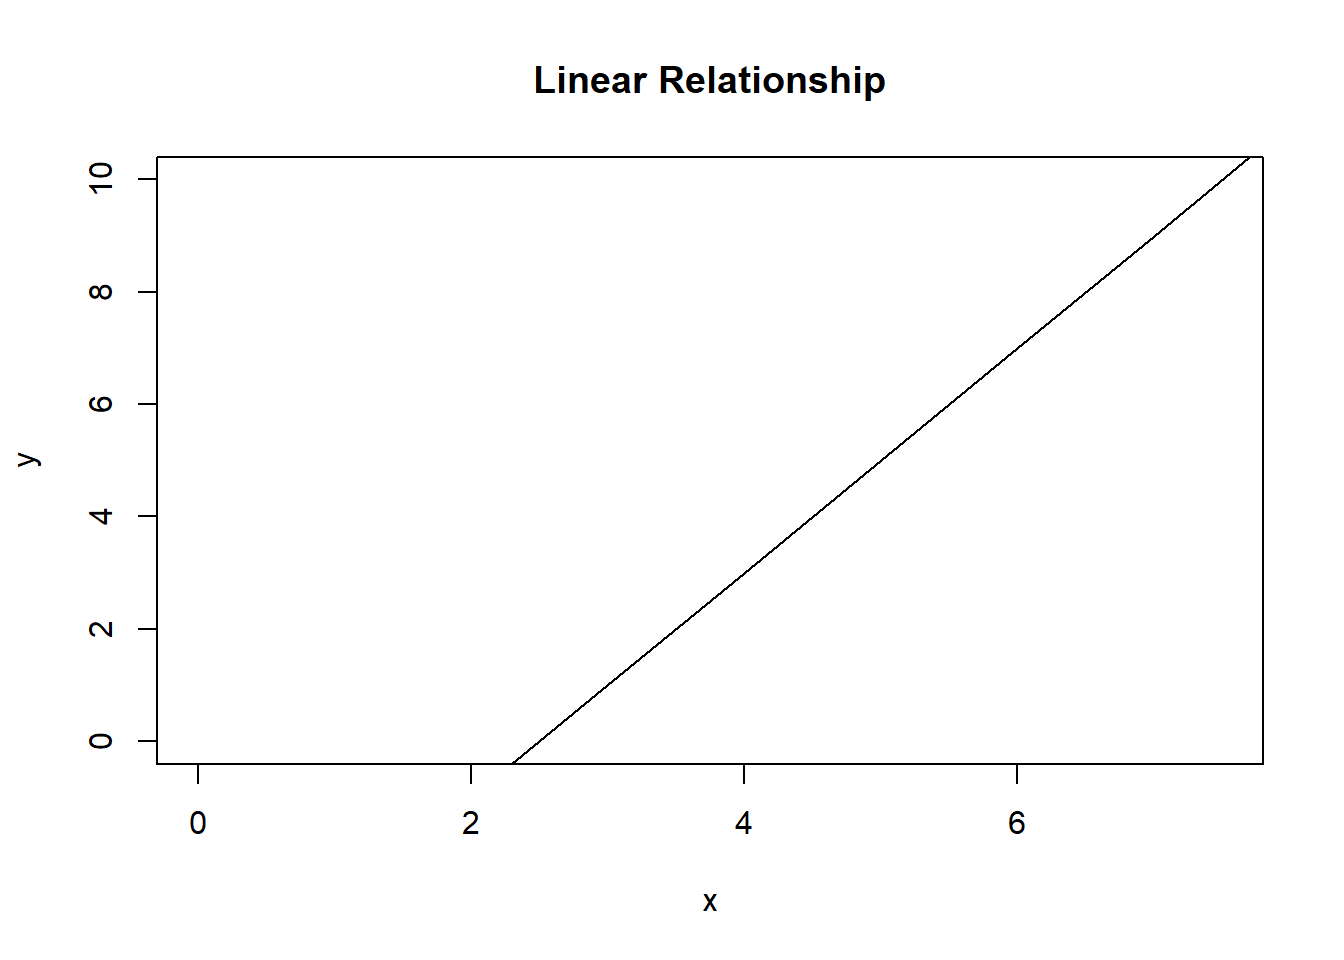 A linear relationship